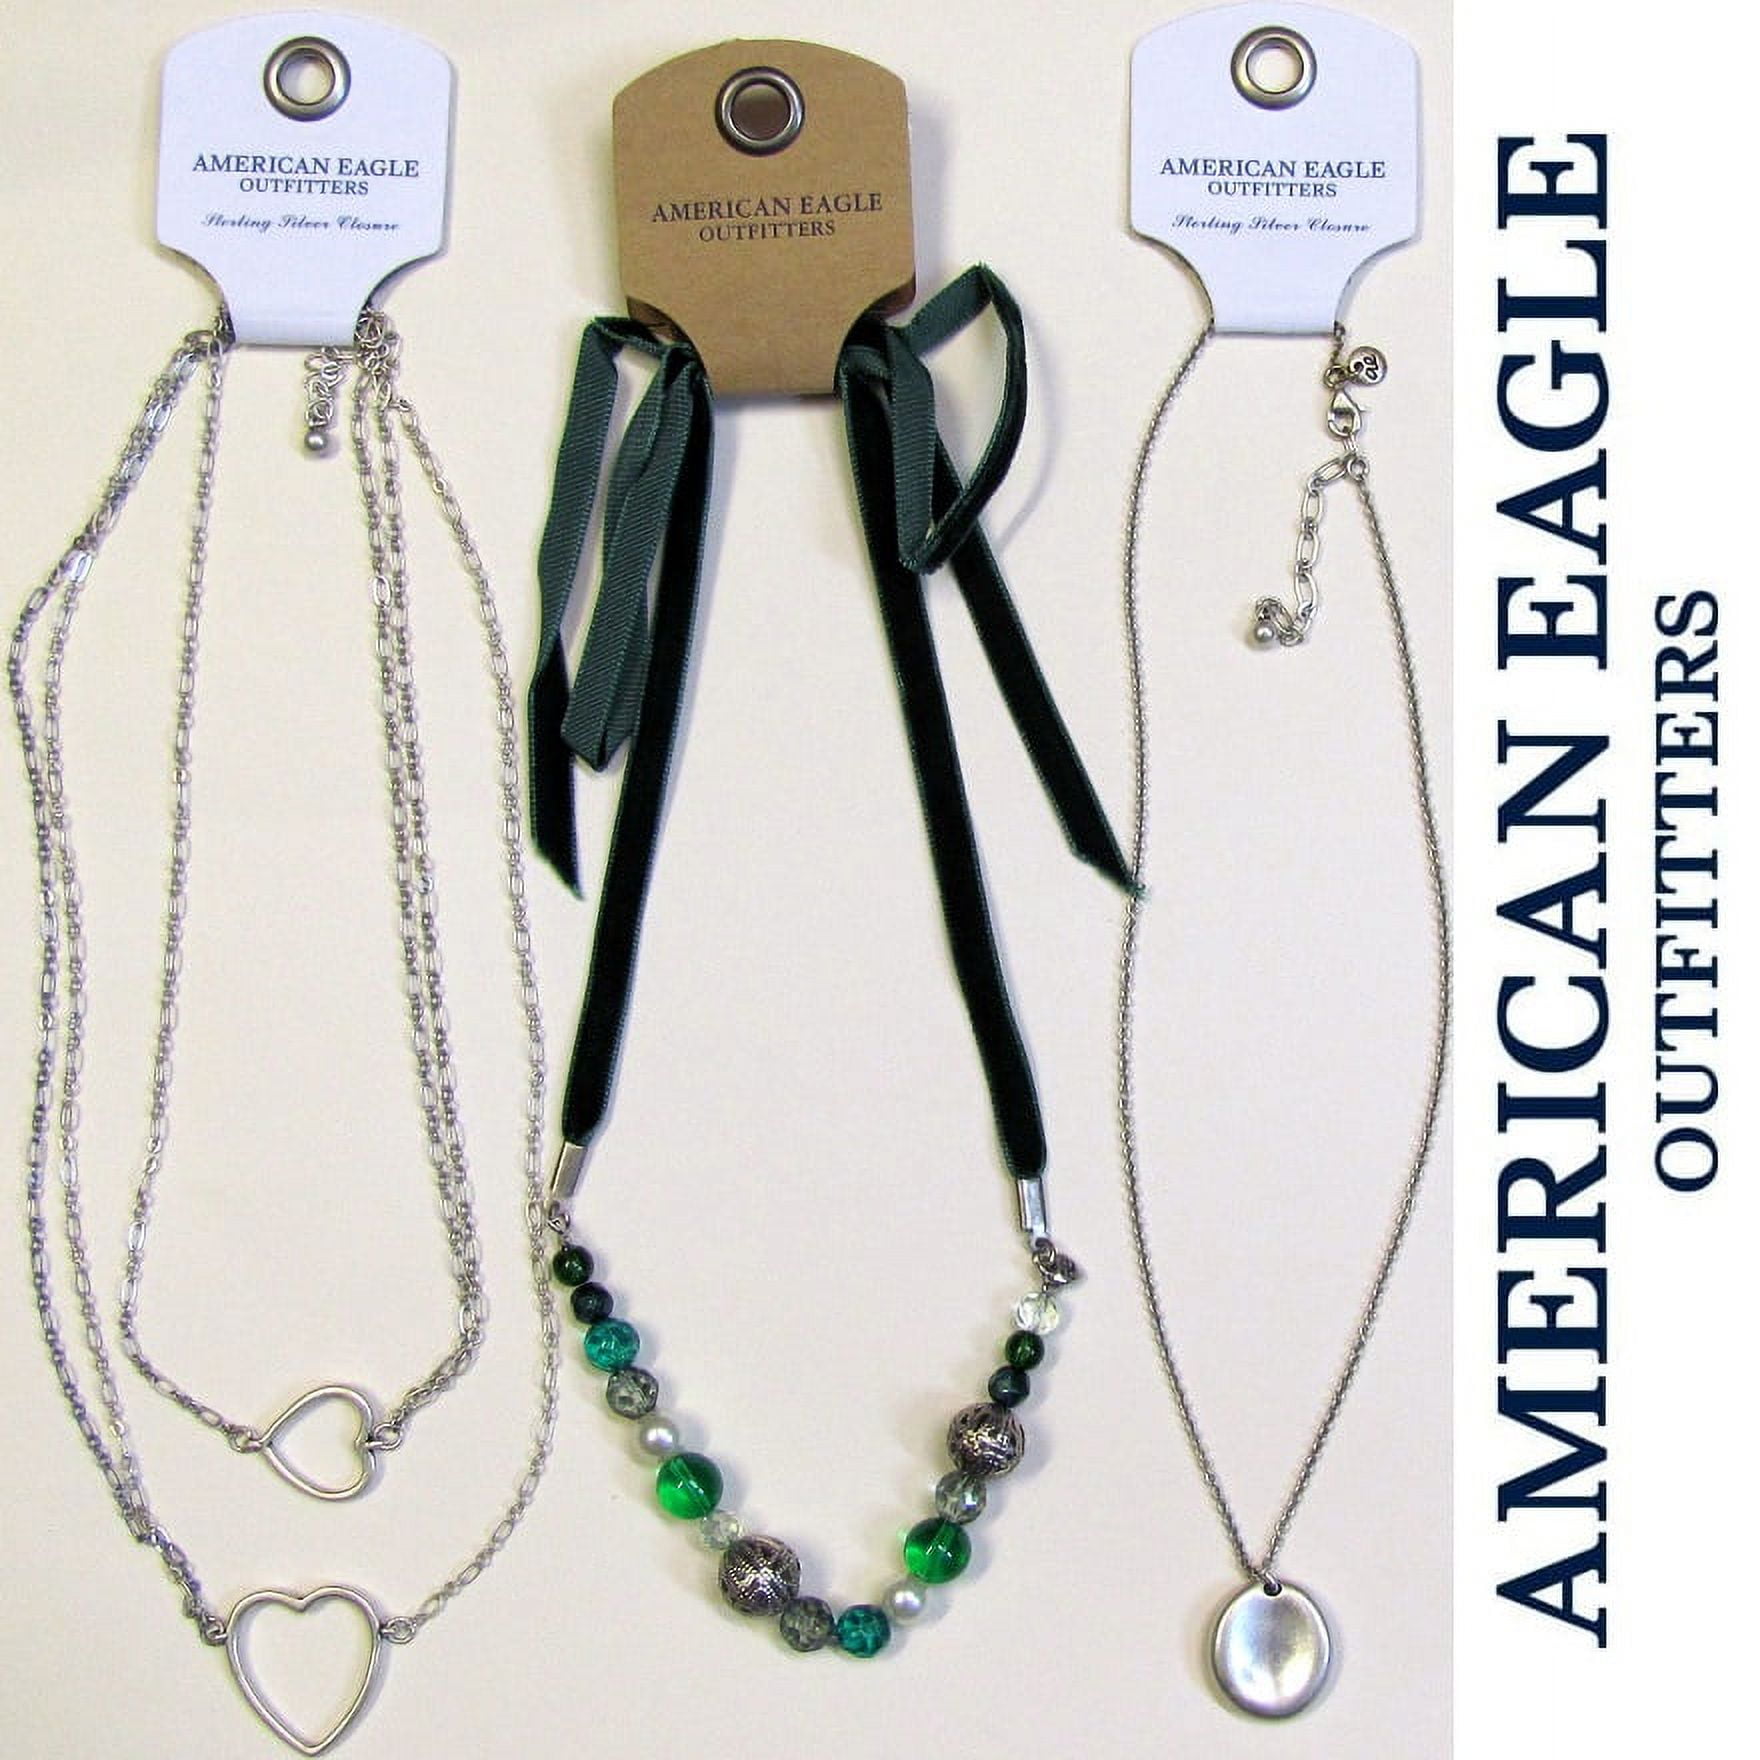 Bundle Wholesale Lot AMERICAN EAGLE OUTFITTERS Necklaces Fashion Jewelry  NWT HTF 